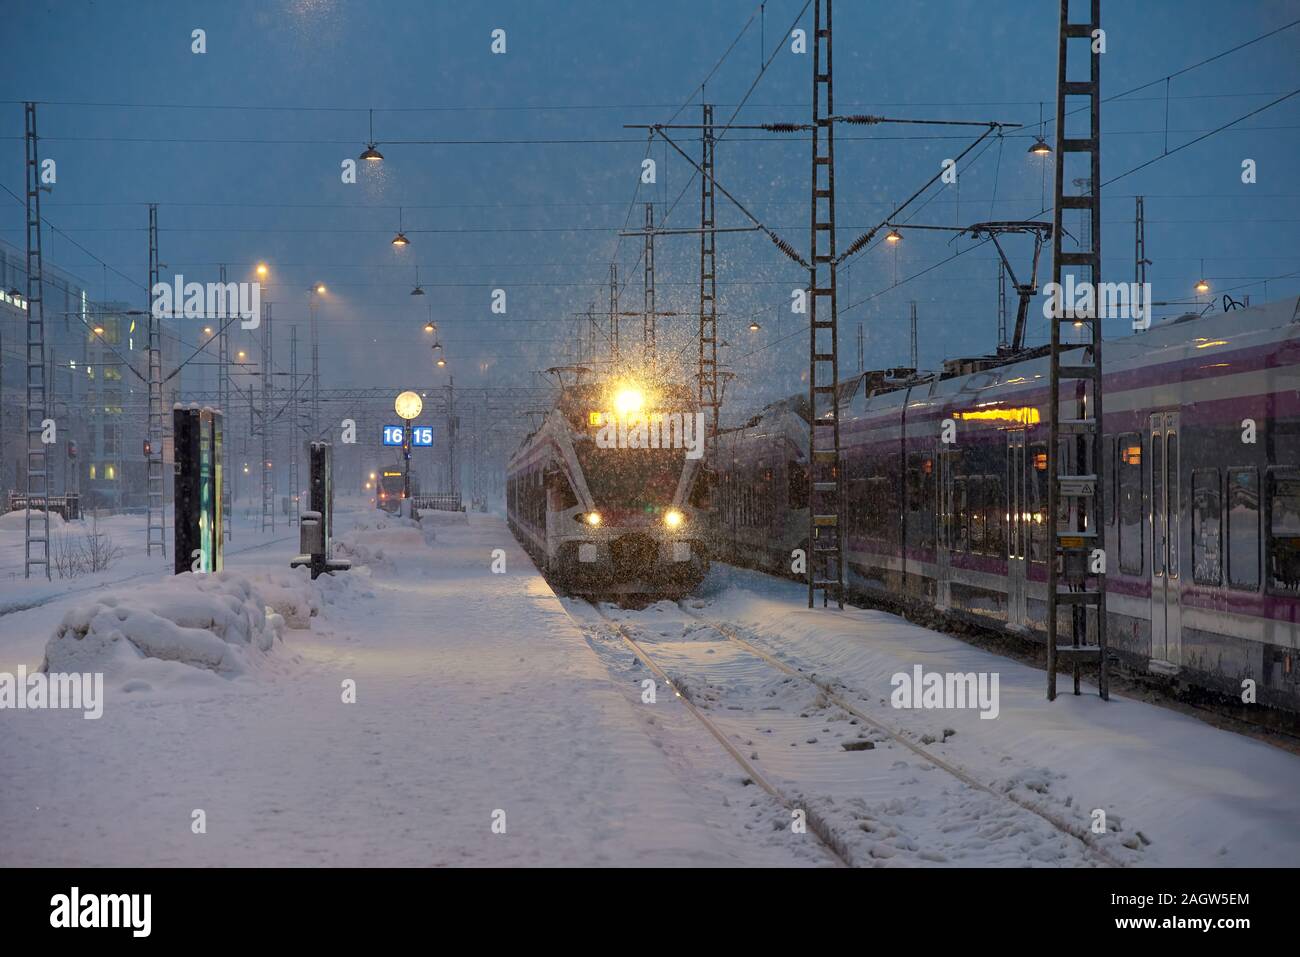 Helsinki, Finland - February 6, 2019: A local commuter train arriving at the Helsinki central railway station in heavy snow storm just before dawn in Stock Photo